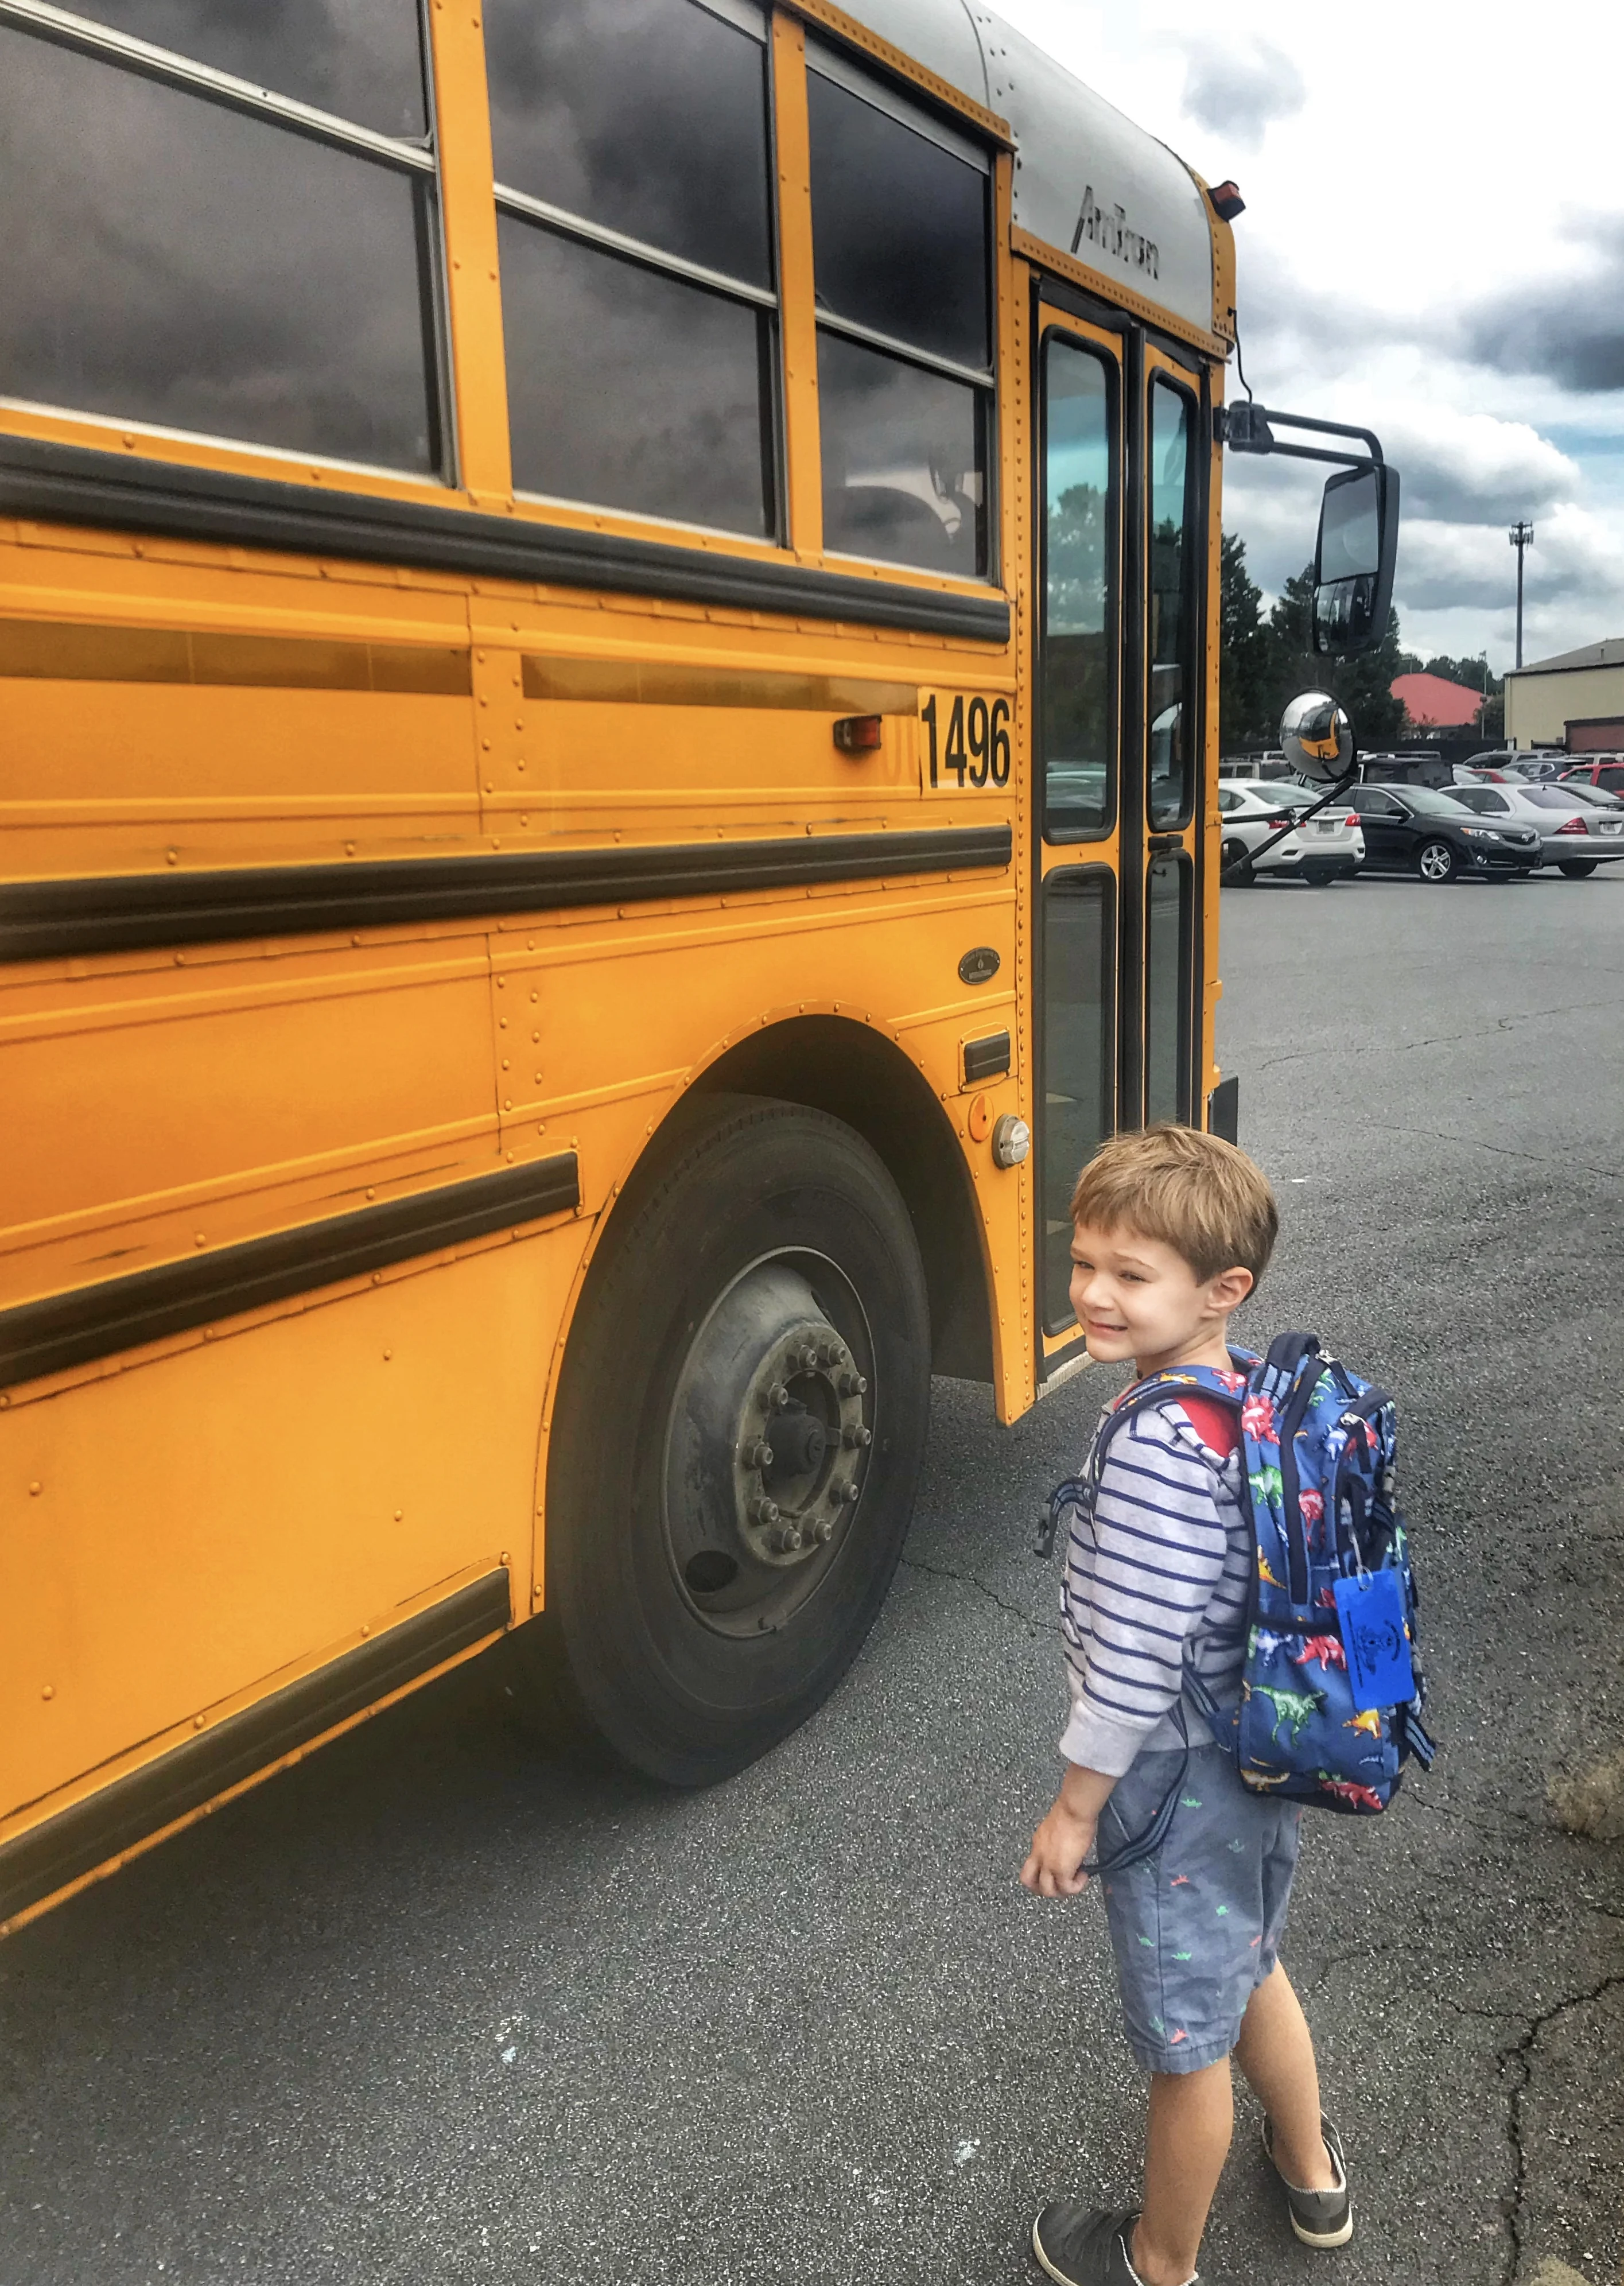 School Bus Safety, School Bus Safety Tips, Propane School Buses, Propane Buses, Propane Engines, Clean Air